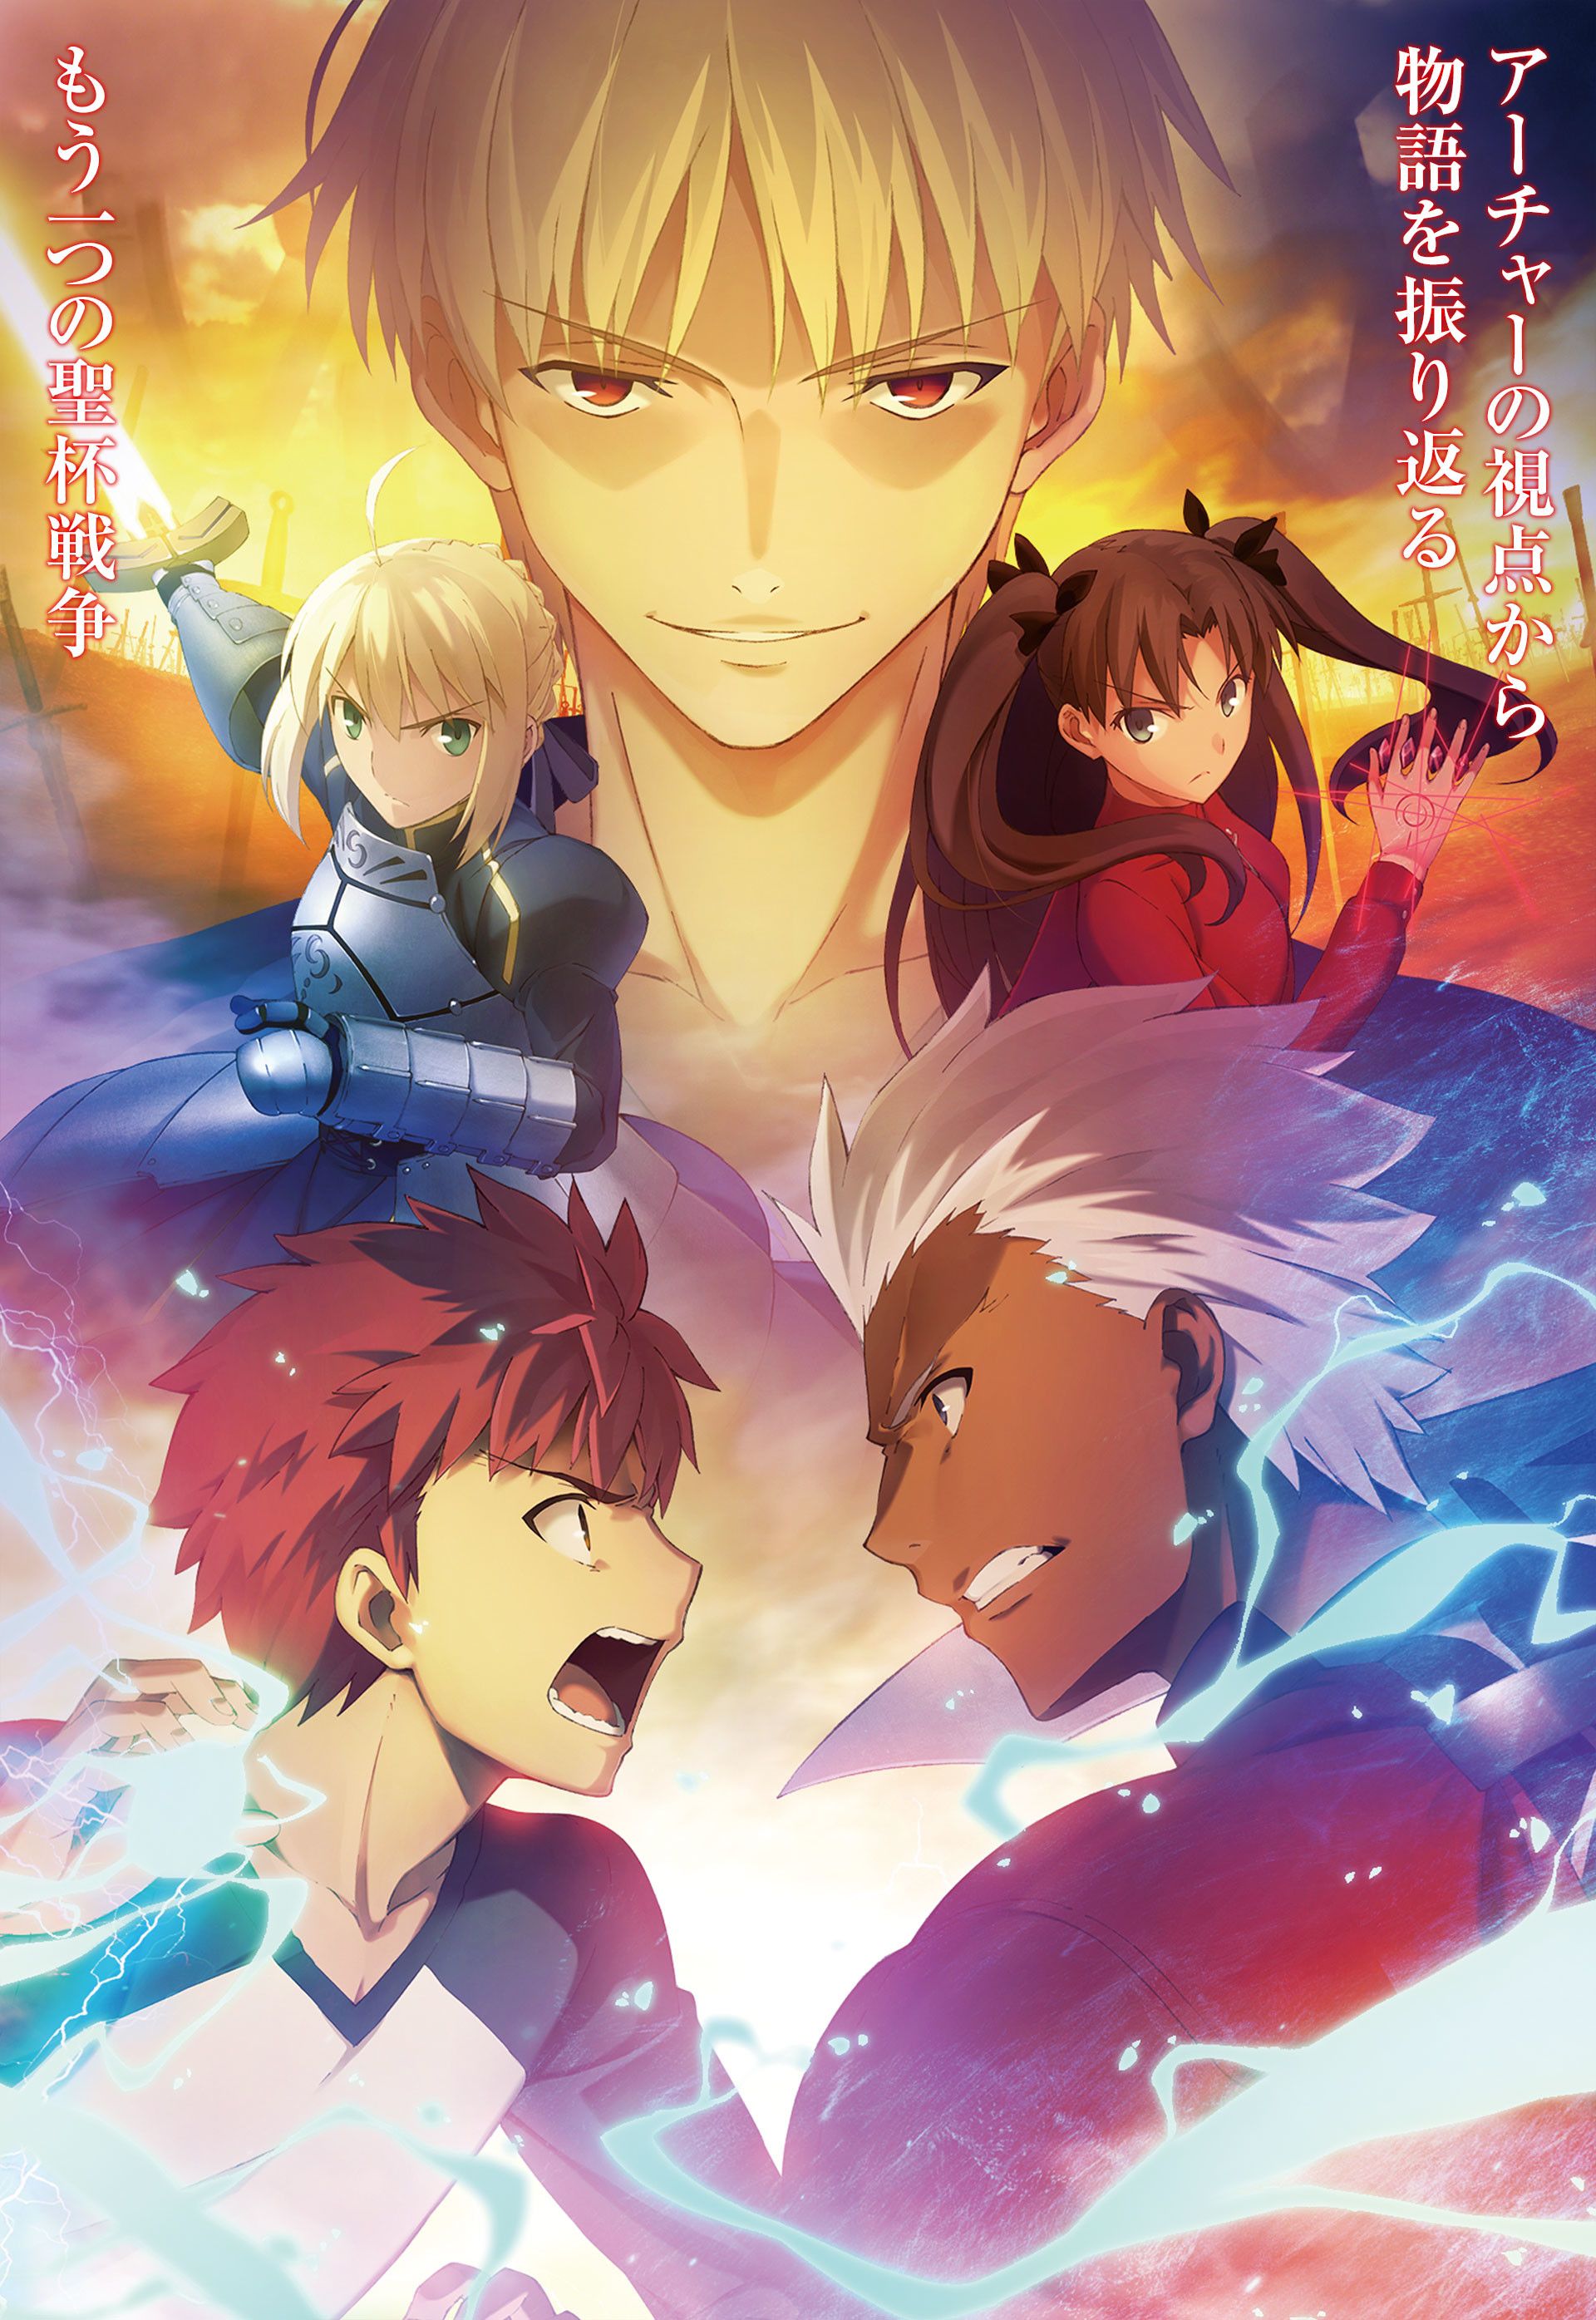 Fate Stay Night Iphone Wallpapers Wallpaper Cave